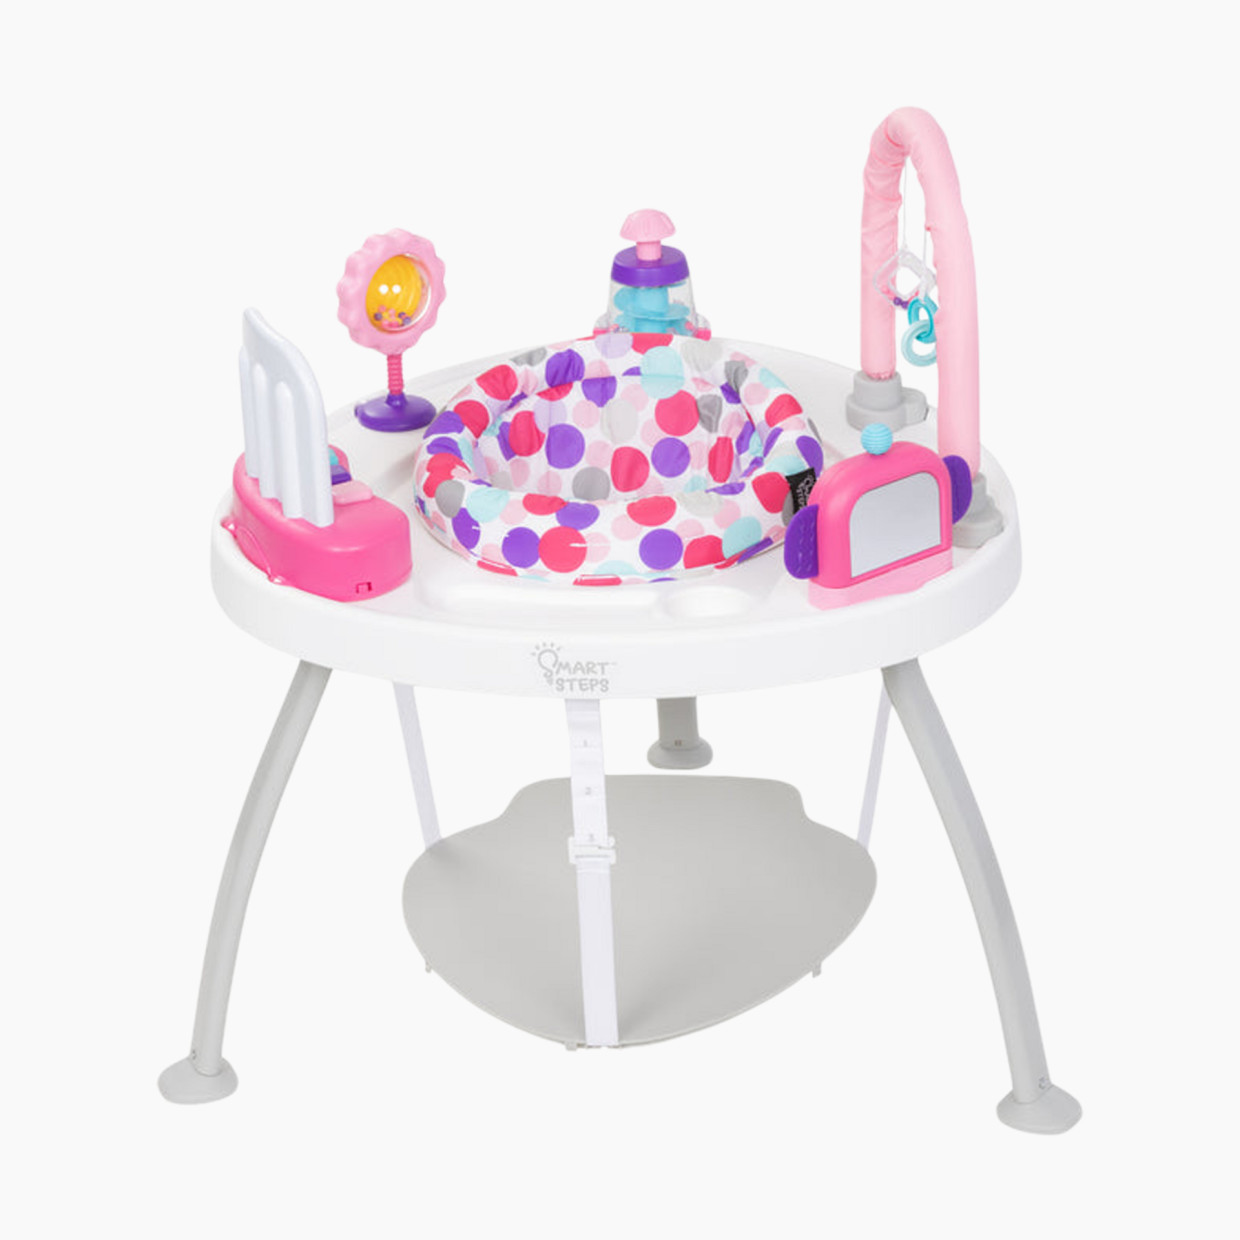 Baby Trend 3-in-1 Bounce N' Play Activity Center PLUS - Princess Pink.